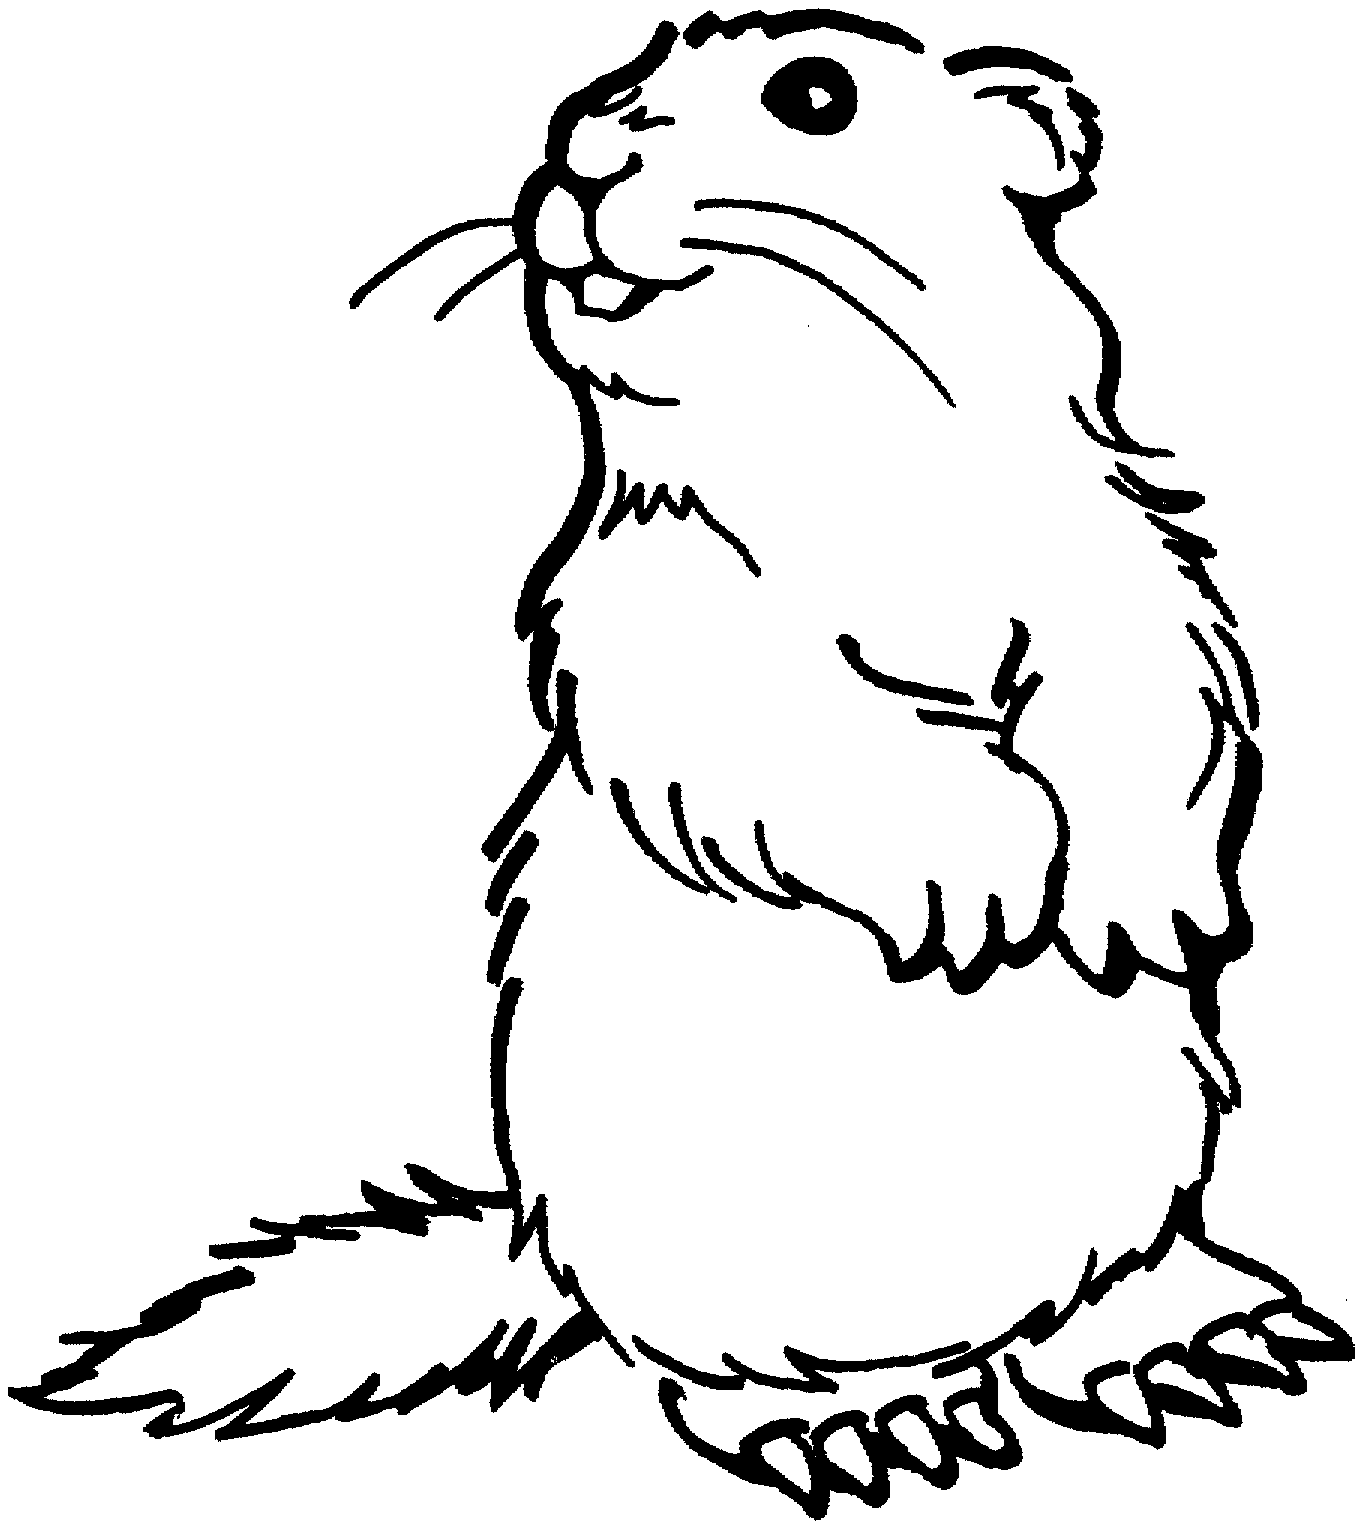 Prarie Dogs clipart #1, Download drawings